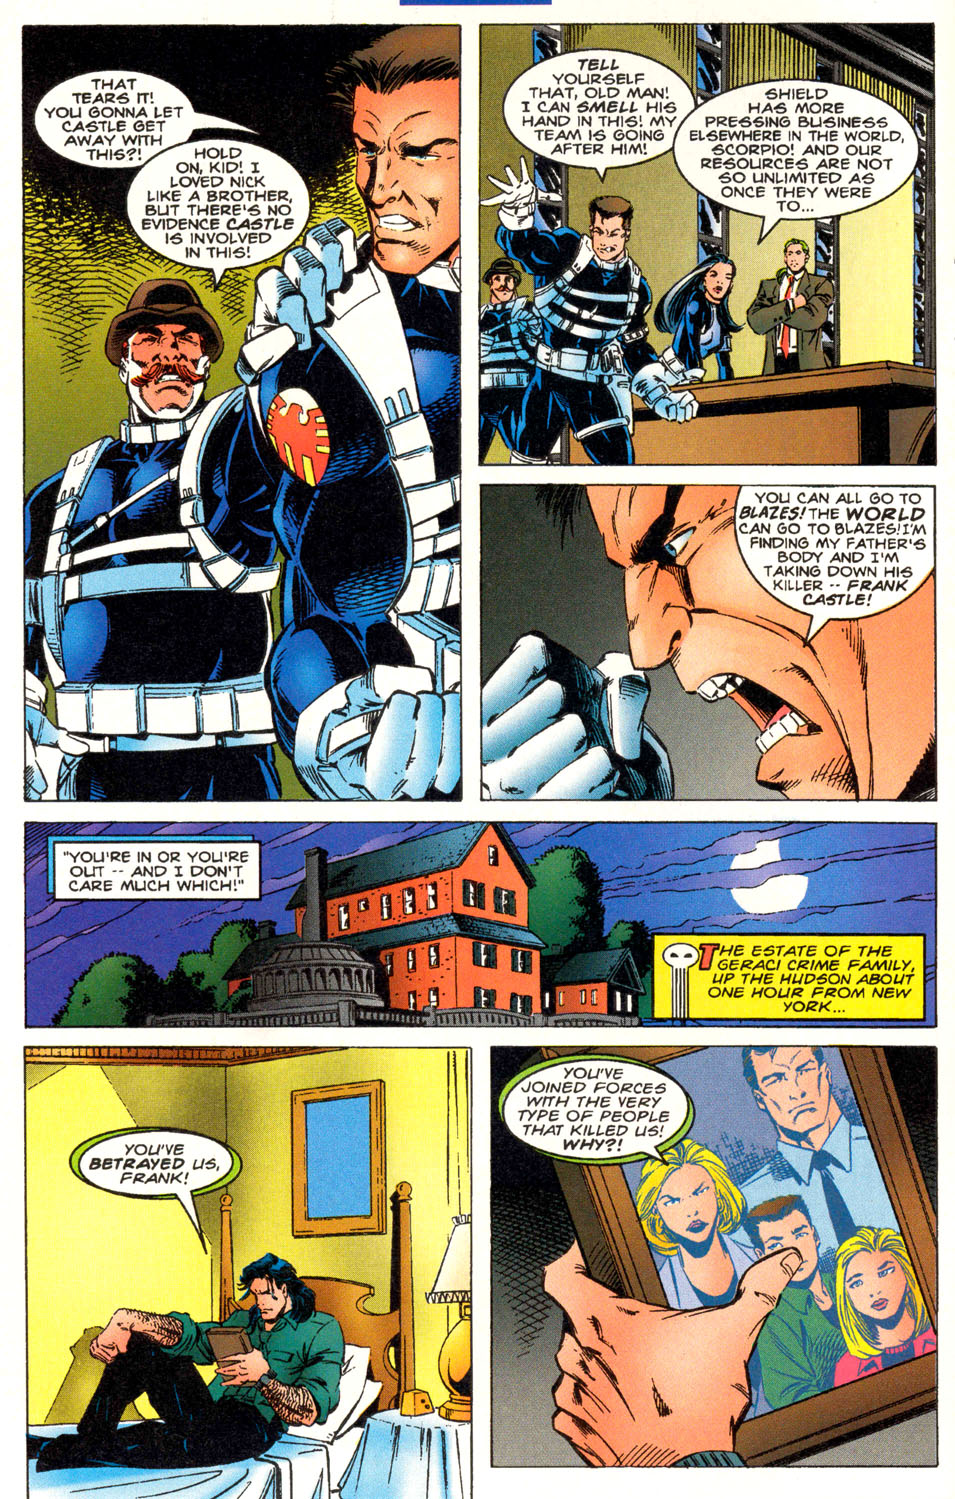 Punisher (1995) issue 7 - He's Alive! - Page 5